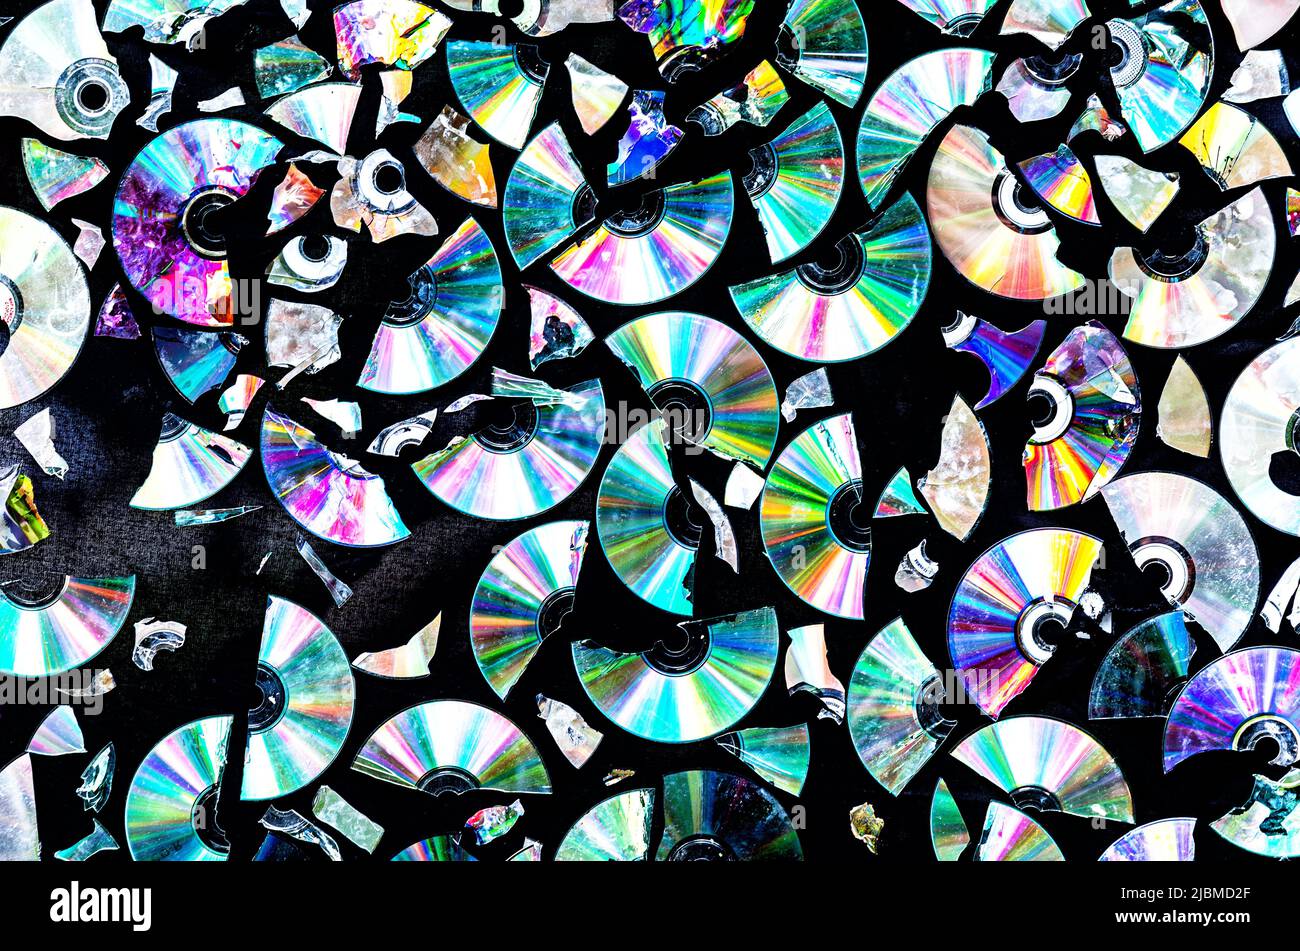 Creative background made of broken CD and DVD data discs Stock Photo